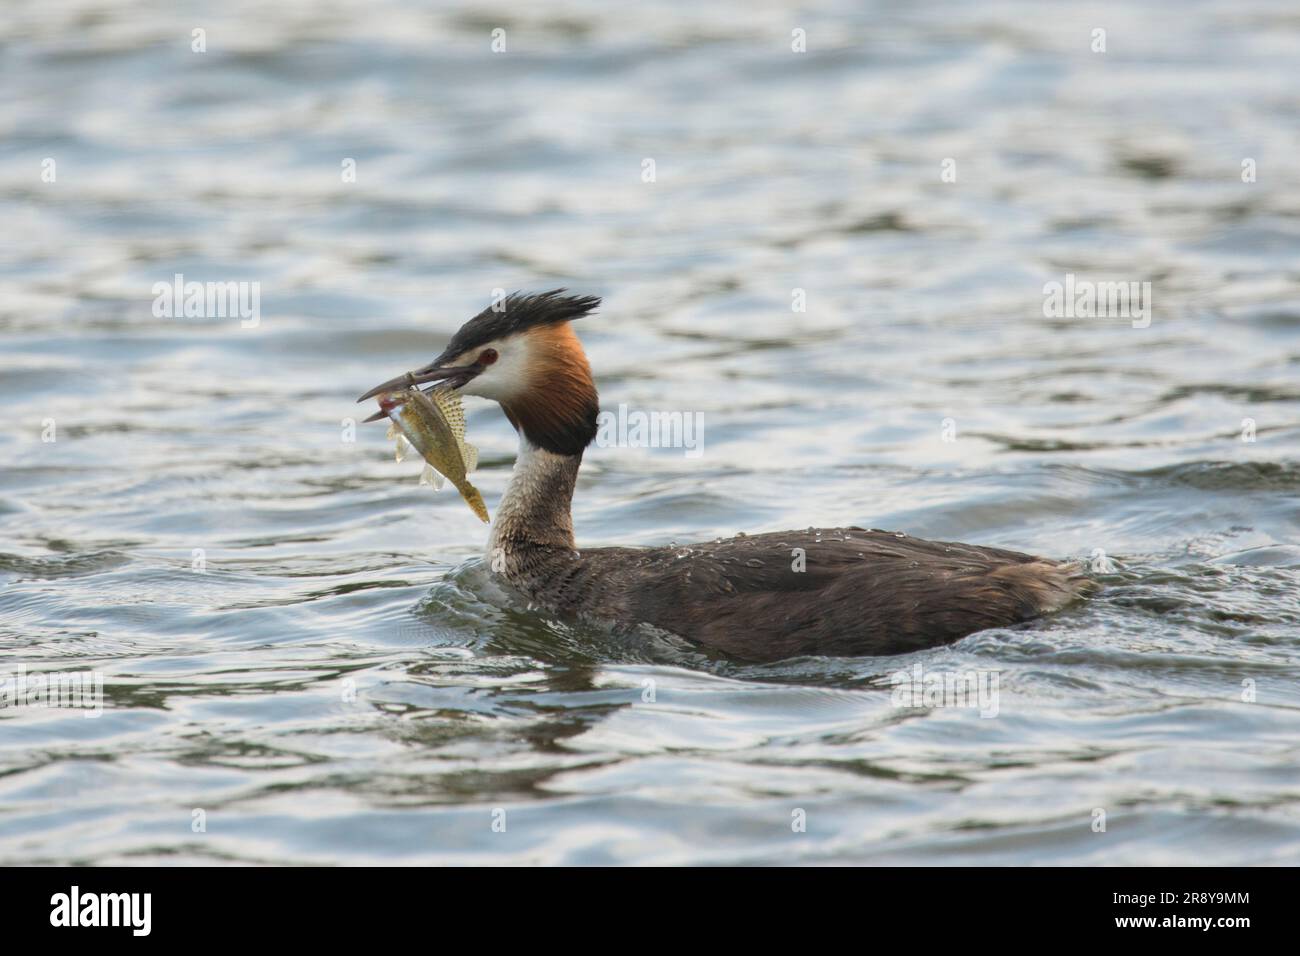 Great crested grebe,  Podiceps cristatus, with a fish in its beak, a Ruffe Gymnocephalus cernua, Norfolk Broads, June Stock Photo